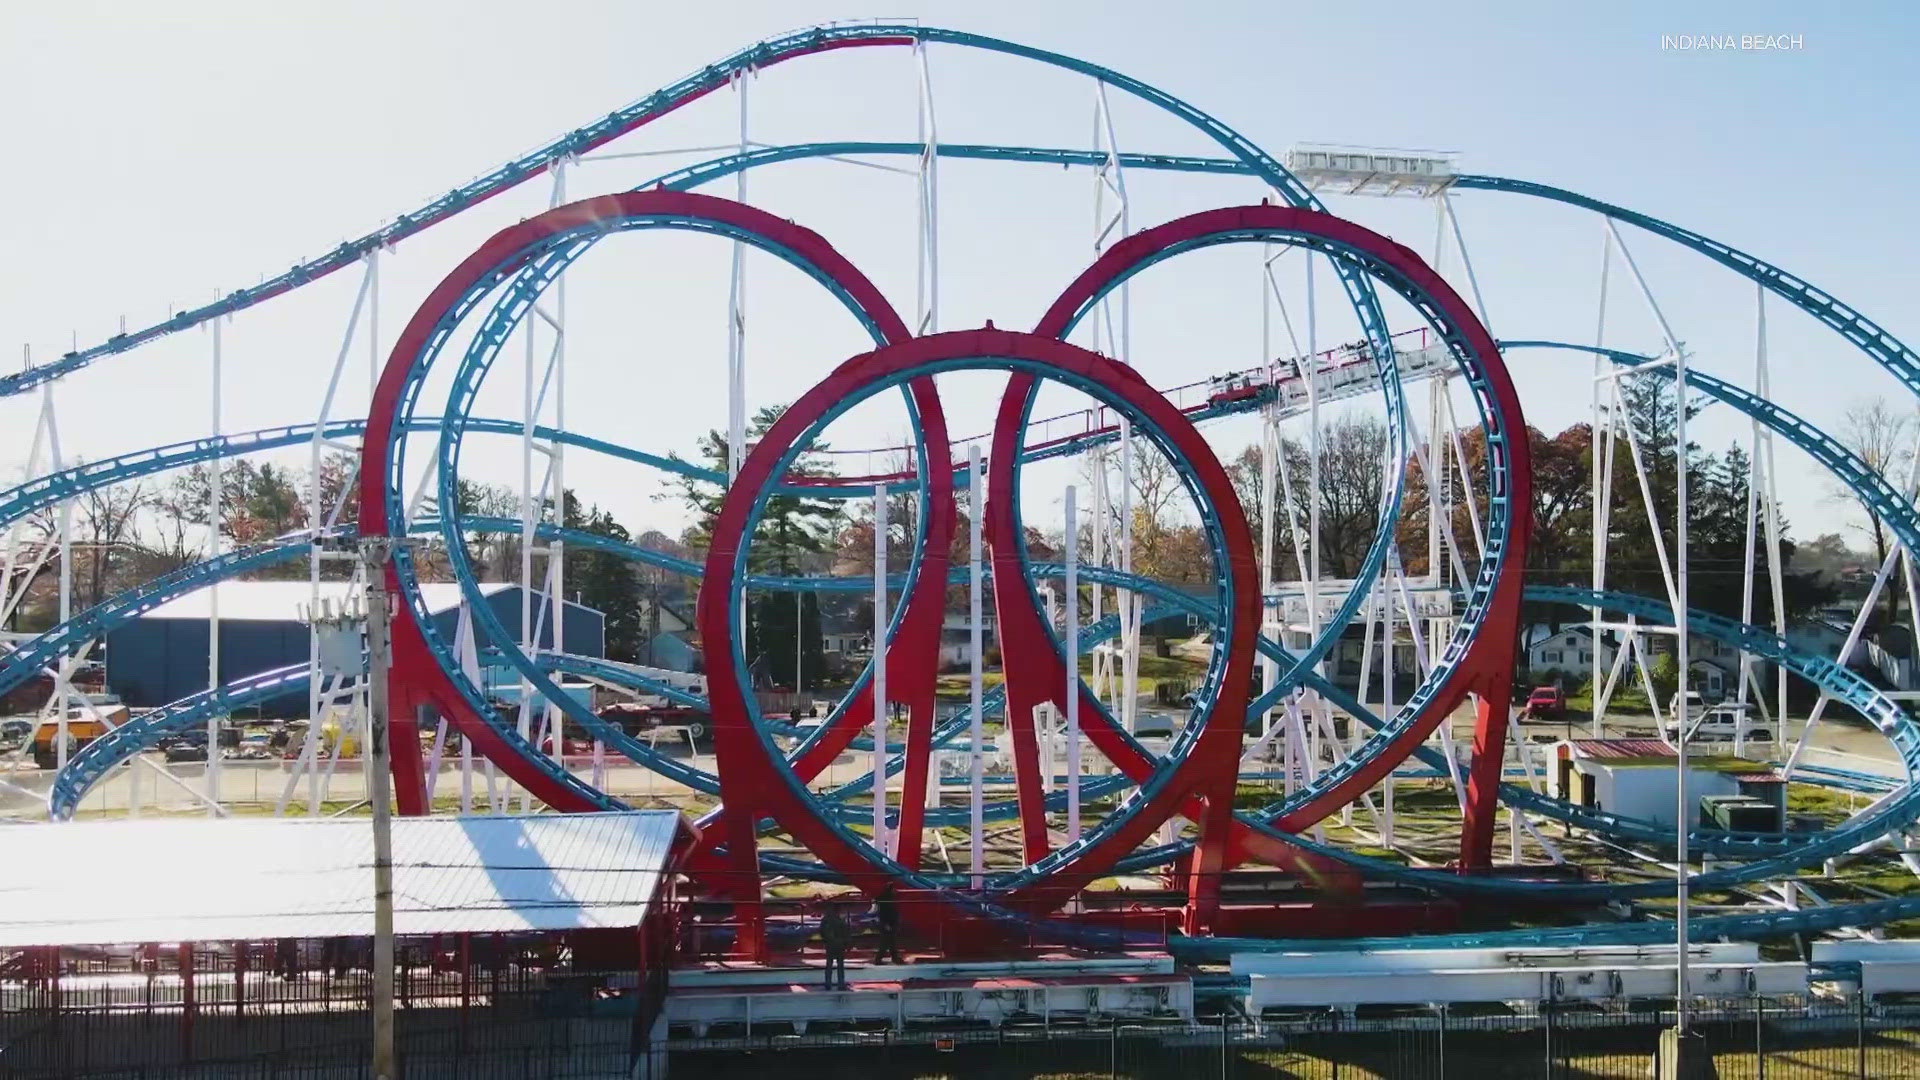 The coaster debuts on opening day, May 11, at Indiana Beach